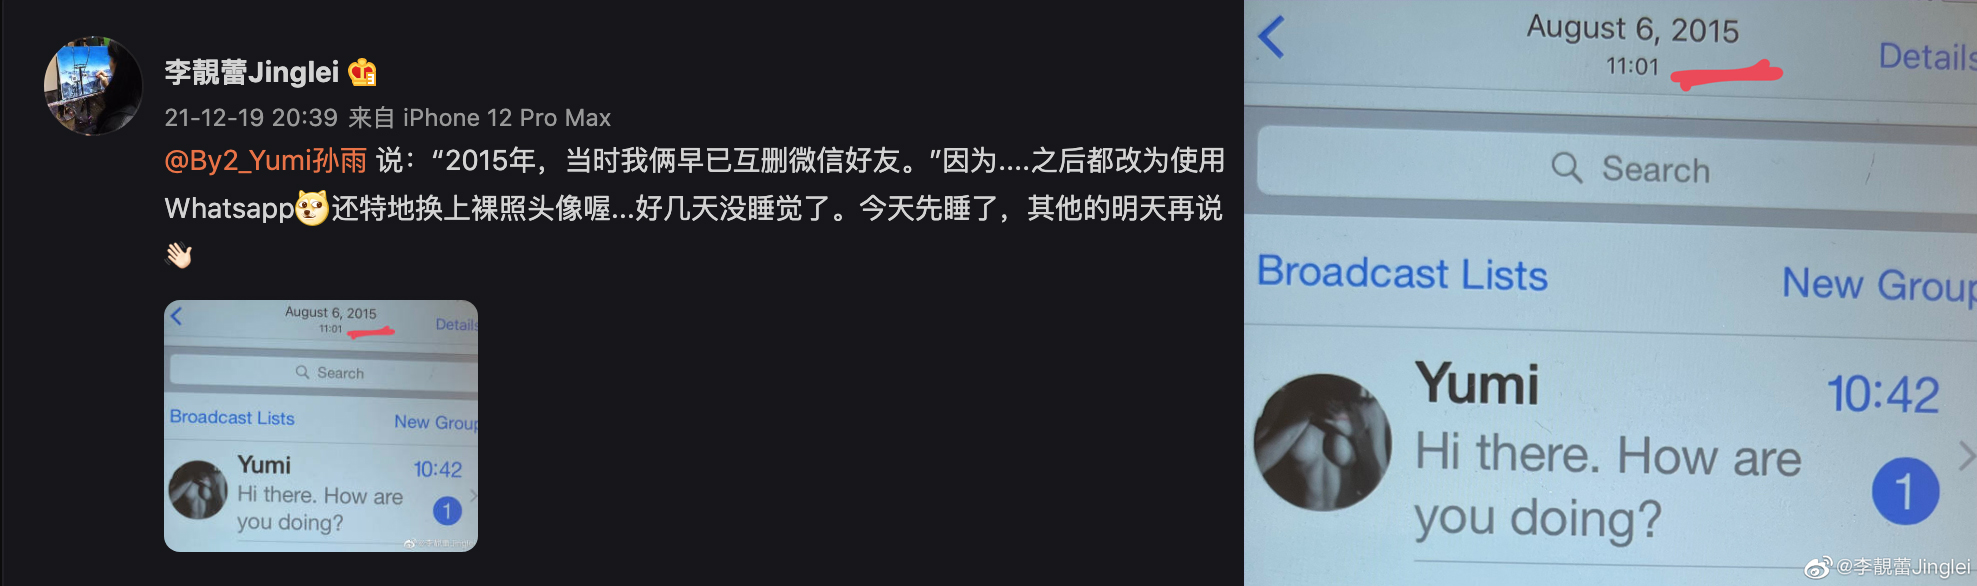 Jinglei's response to Yumi's post show she's not buying the singer's story